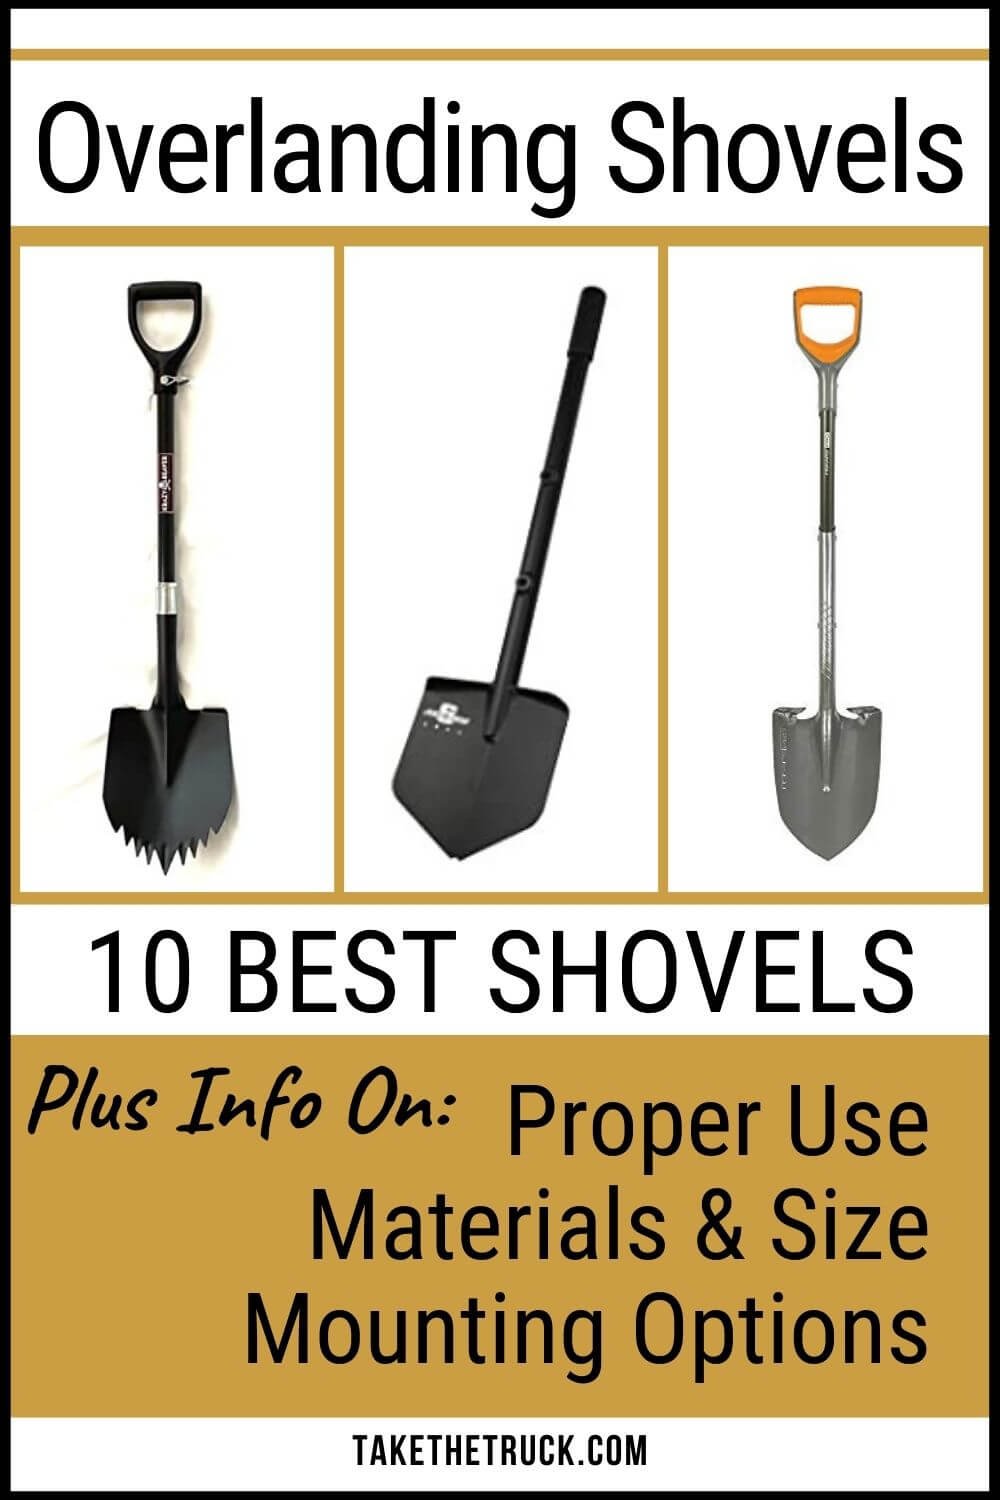 How To Choose The Best Off Road Shovel For Overlanding Take The Truck